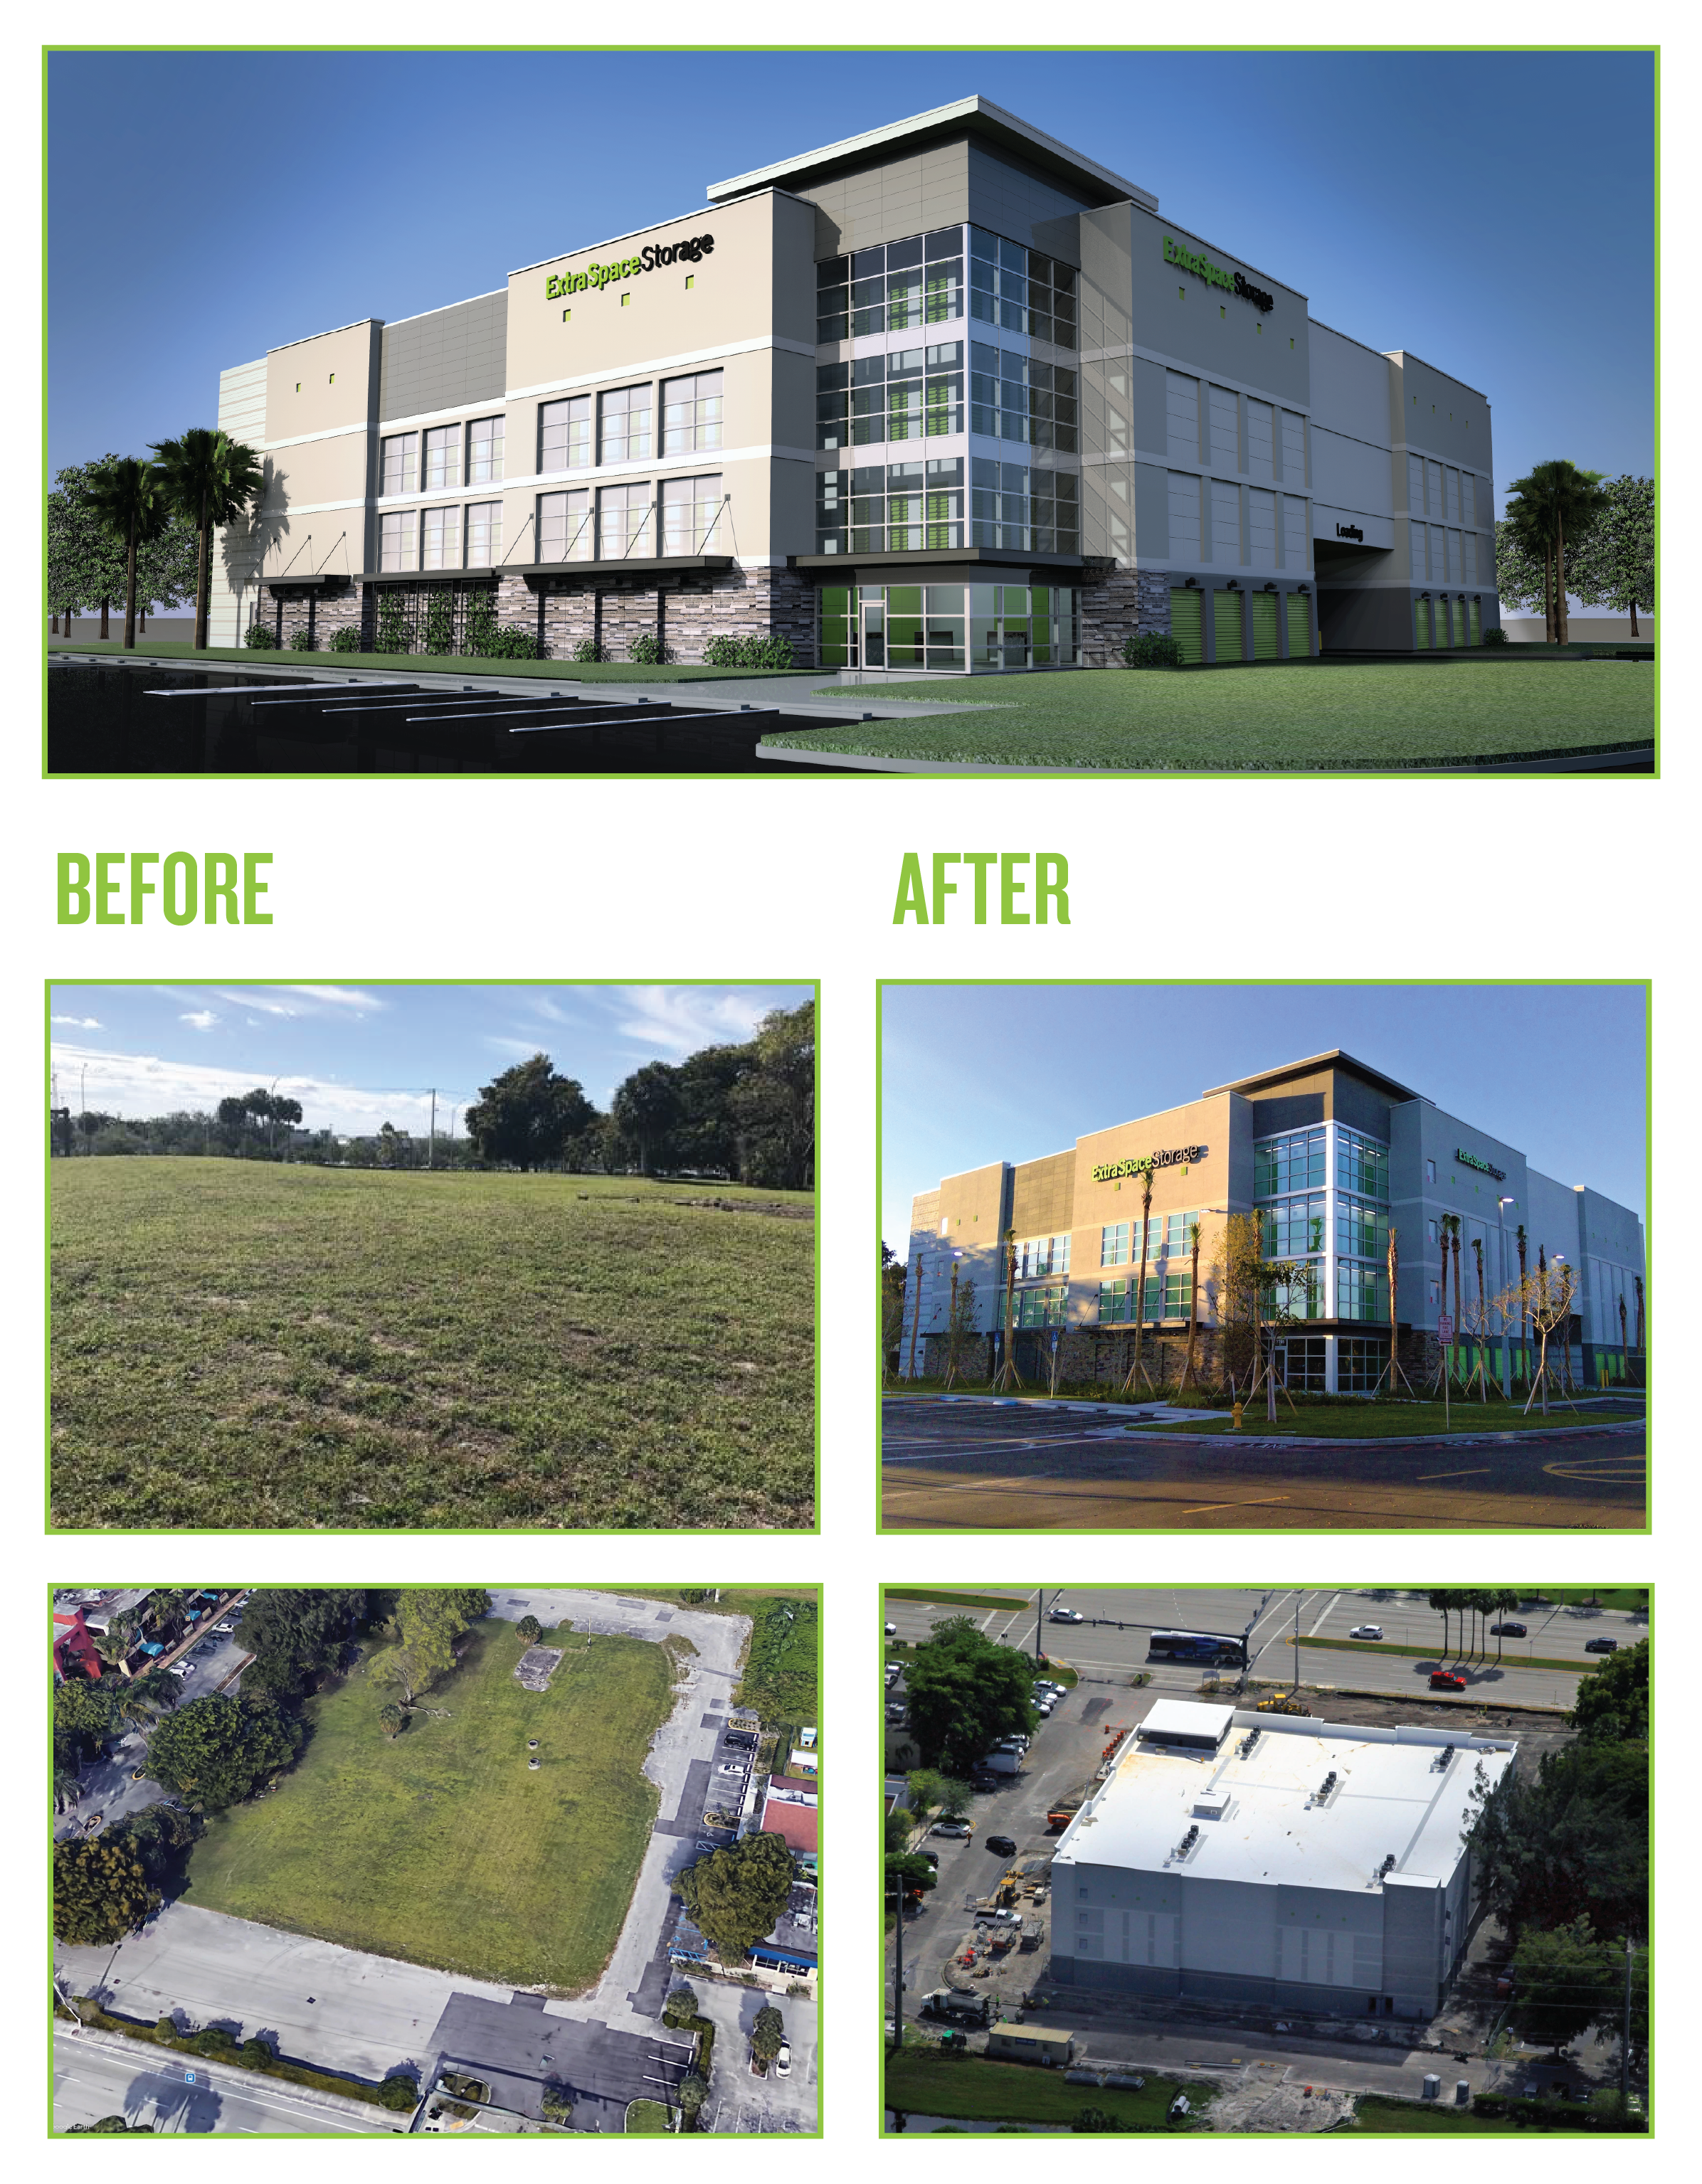 Before and after photos of Extra Space Storage development in Plantation, FL